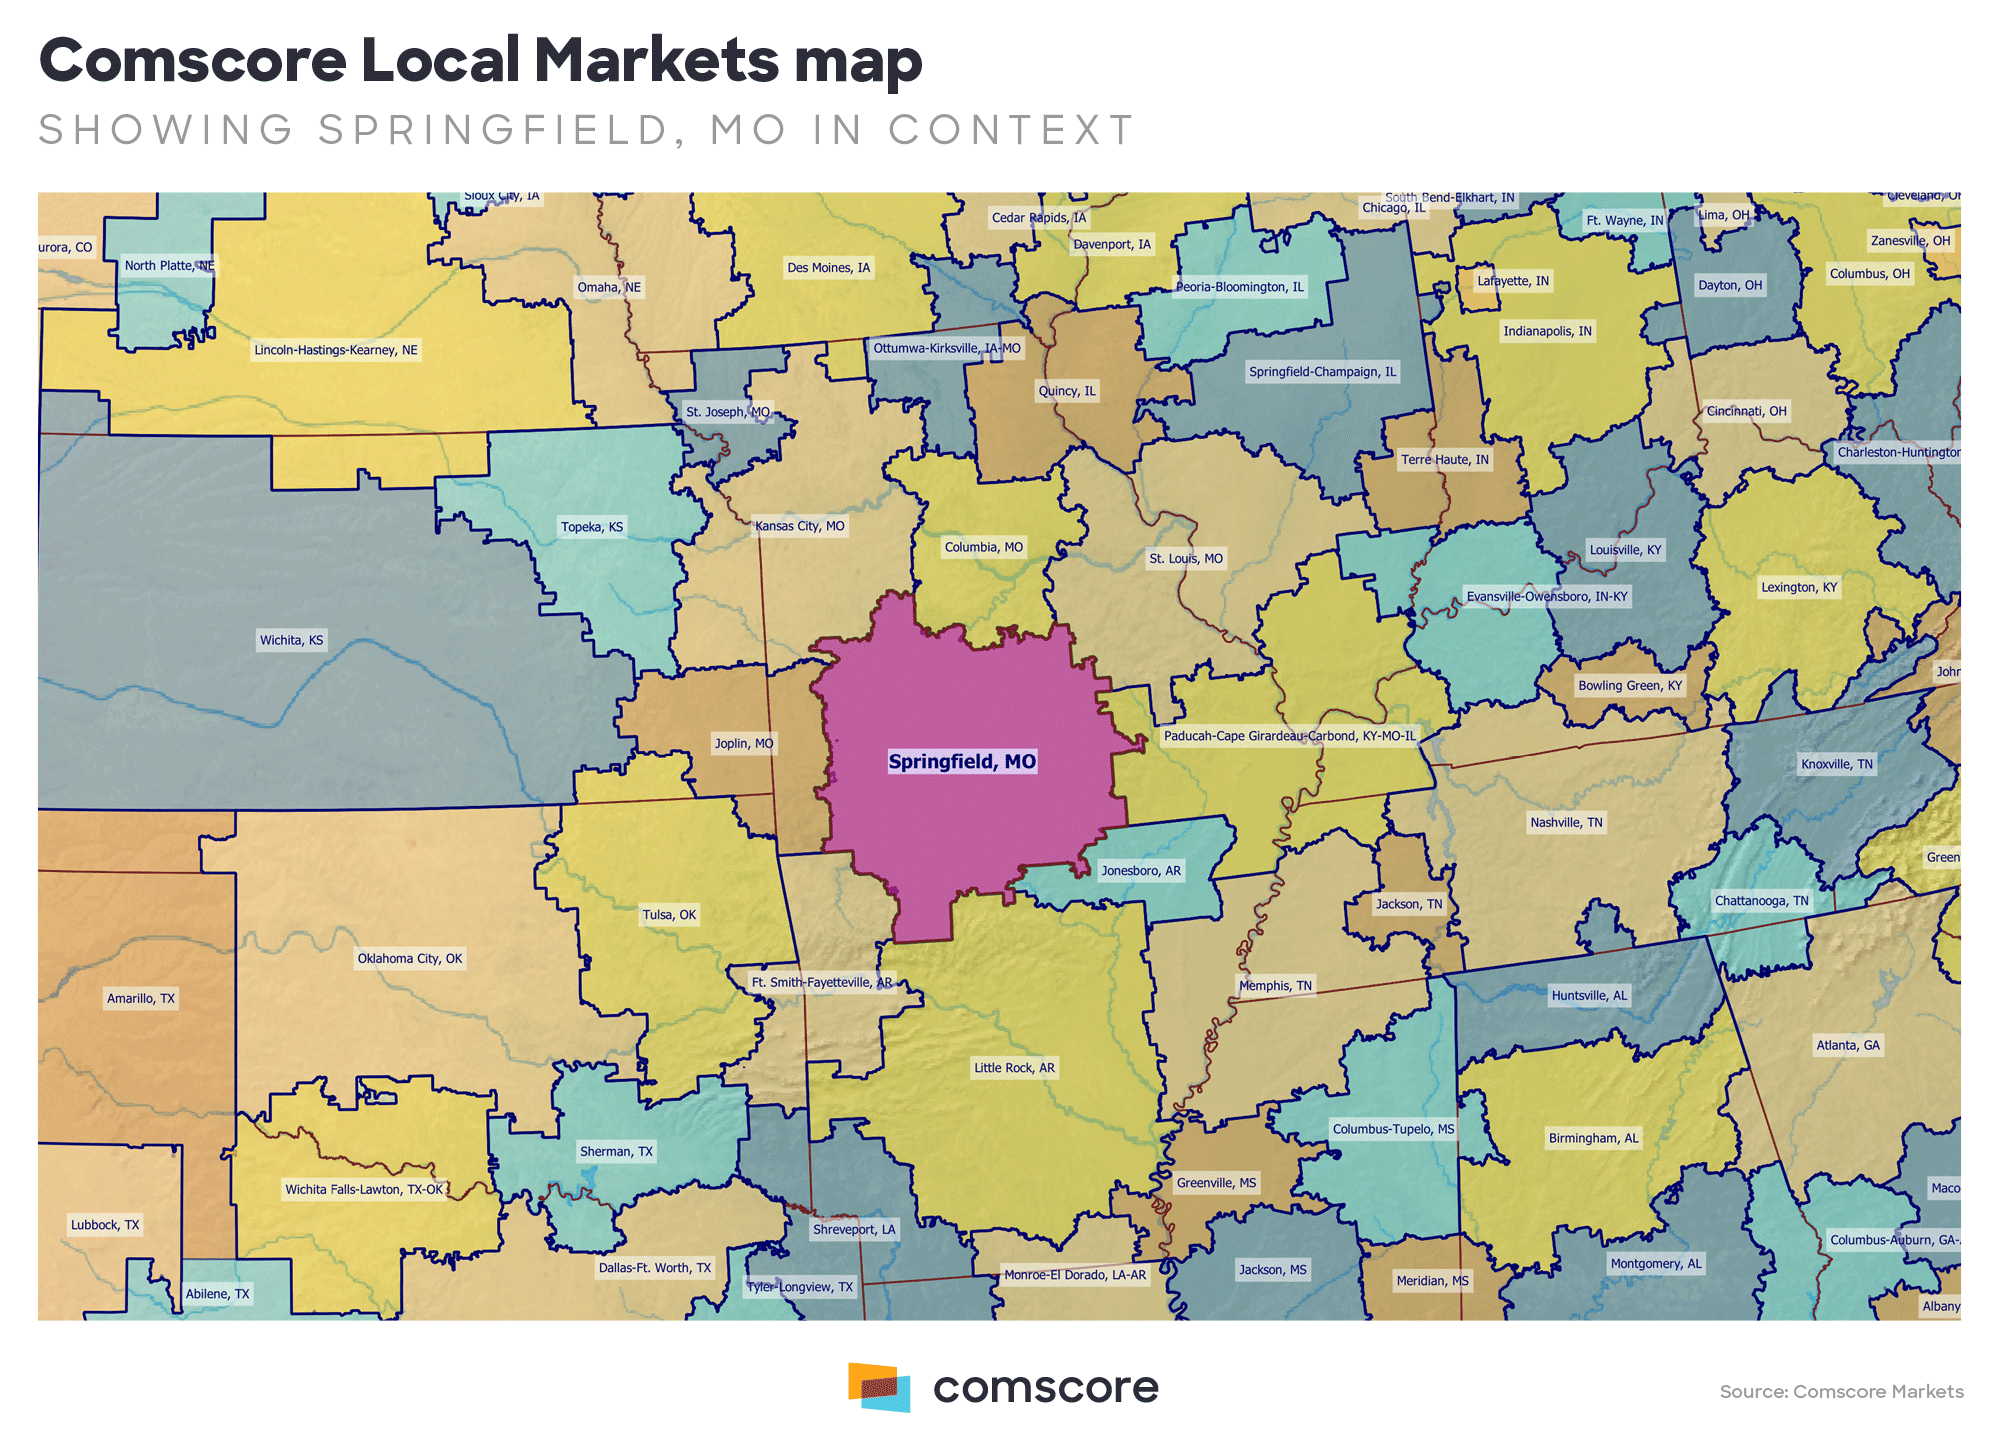 Comscore Local Markets map, showing Springfield MO